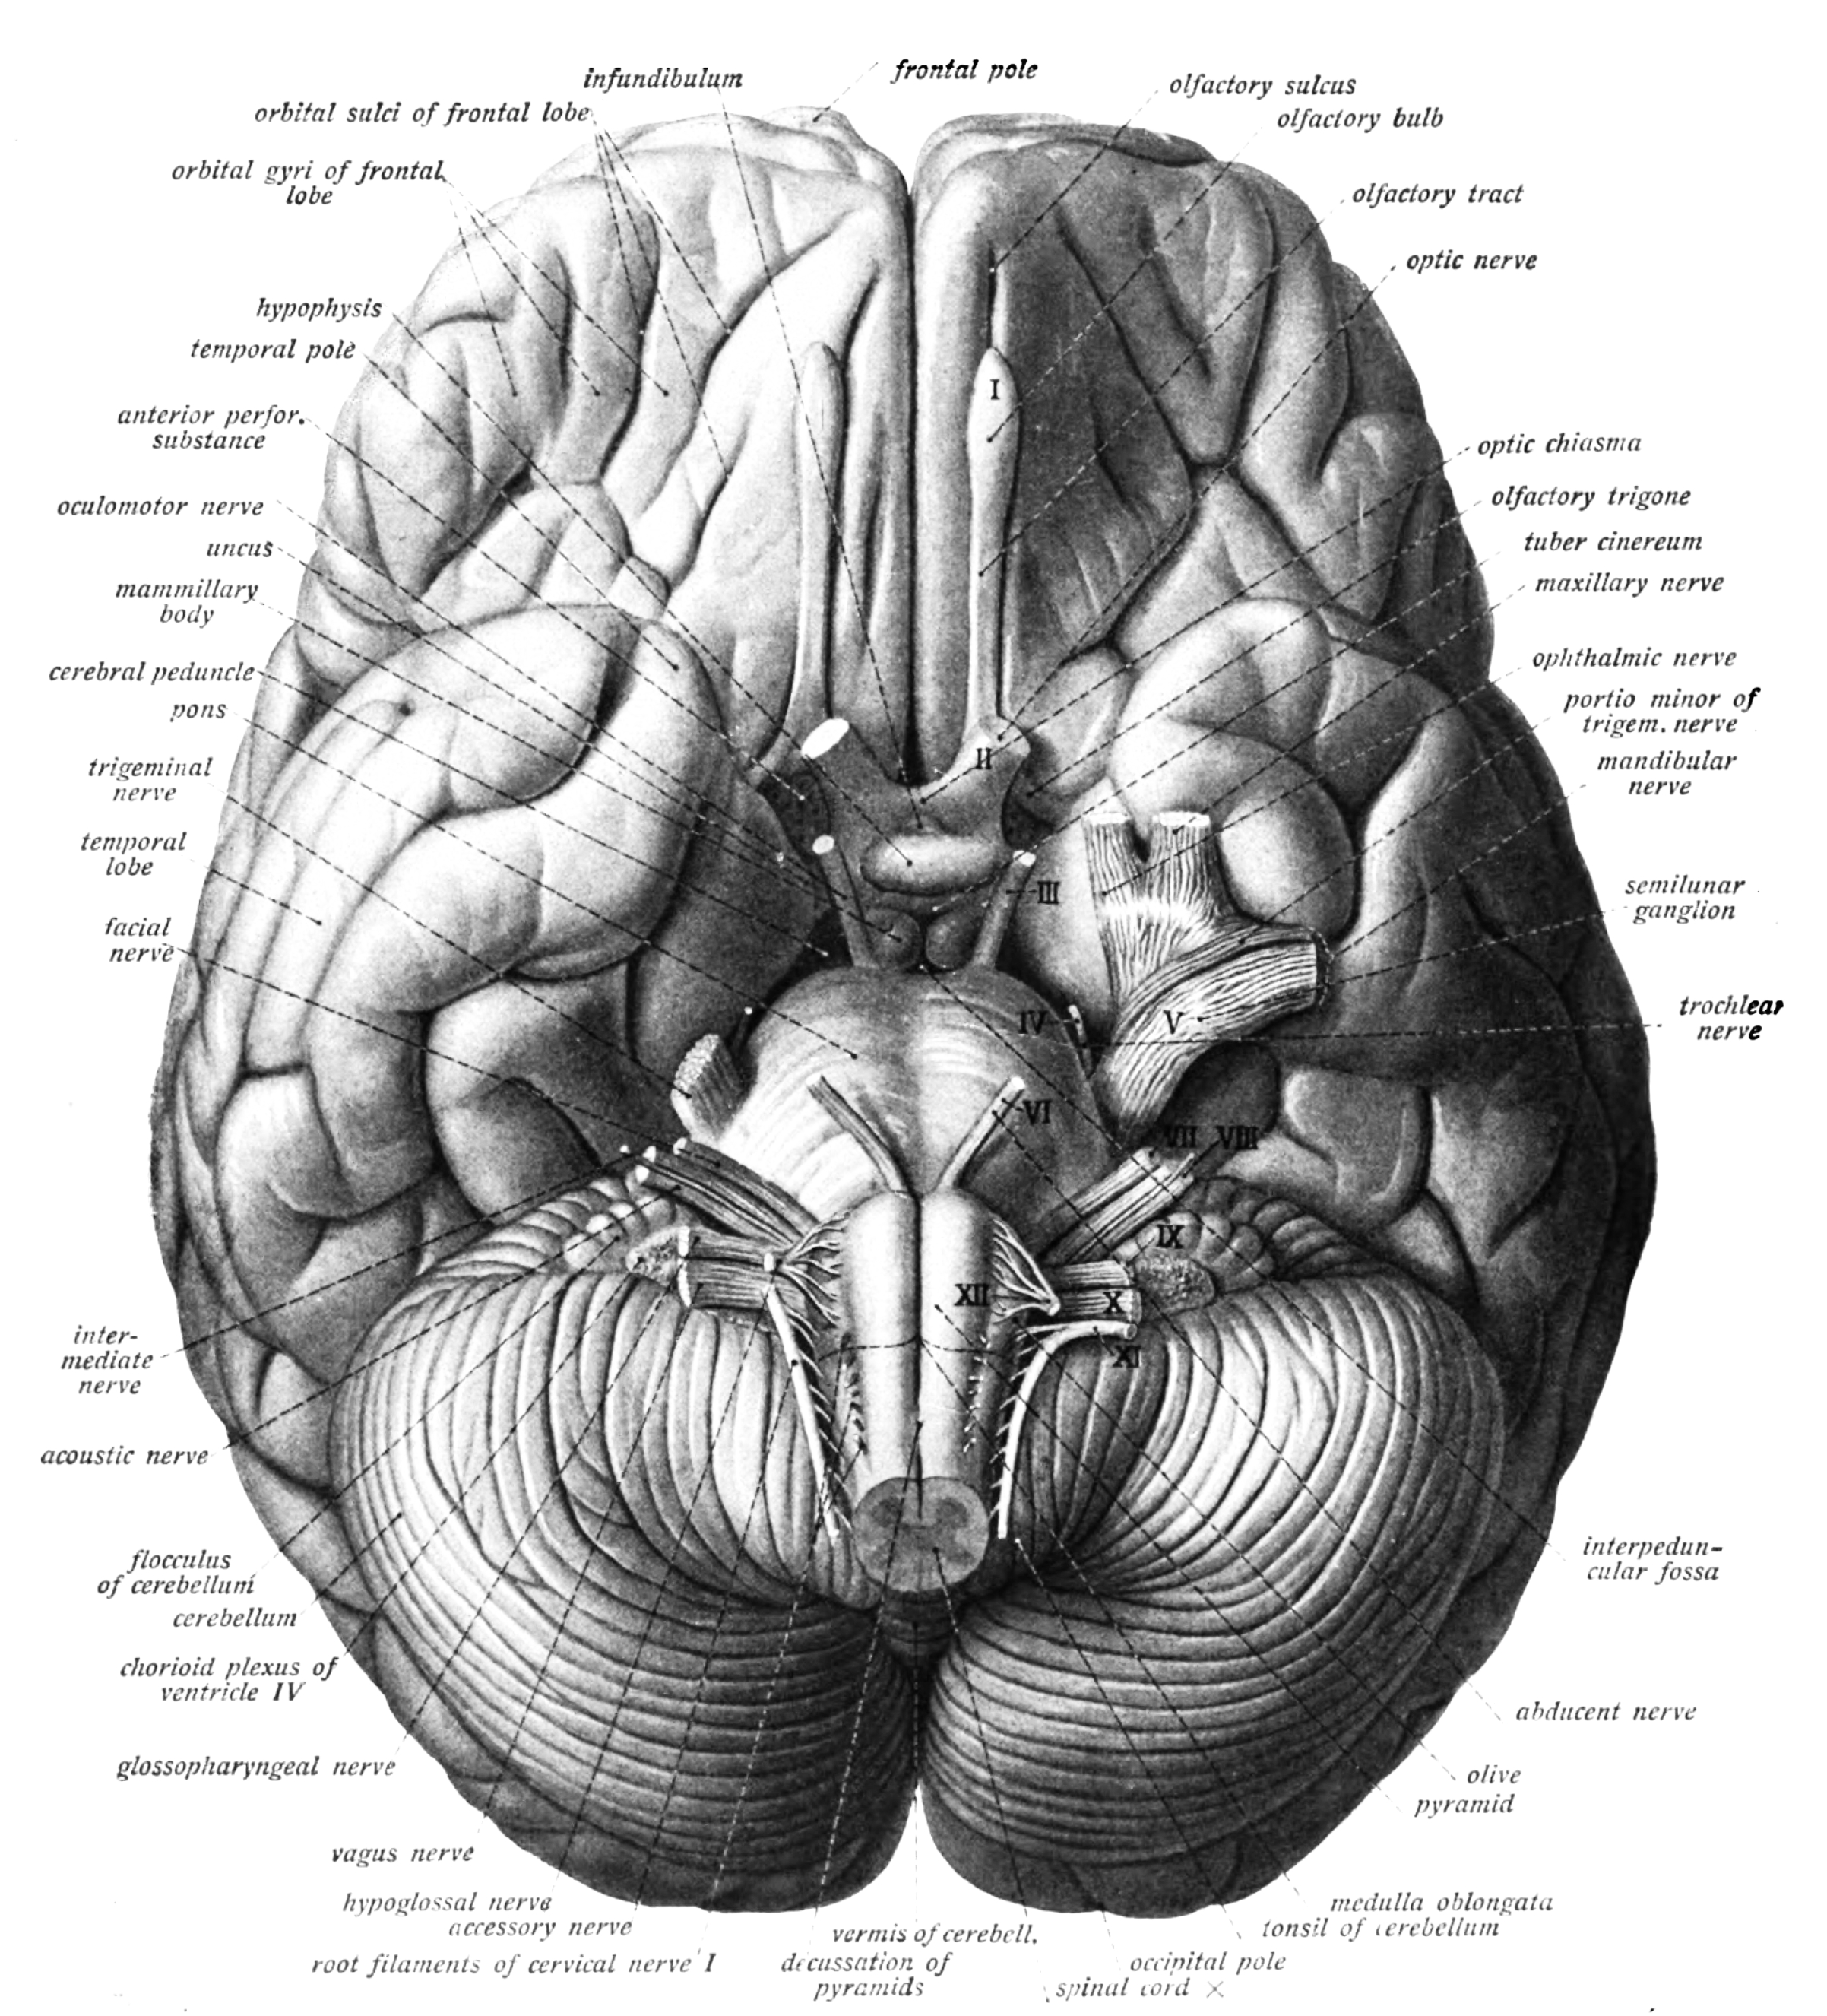 Bottom view of the human brain. Sobotta’s Textbook and Atlas of Human Anatomy 1909